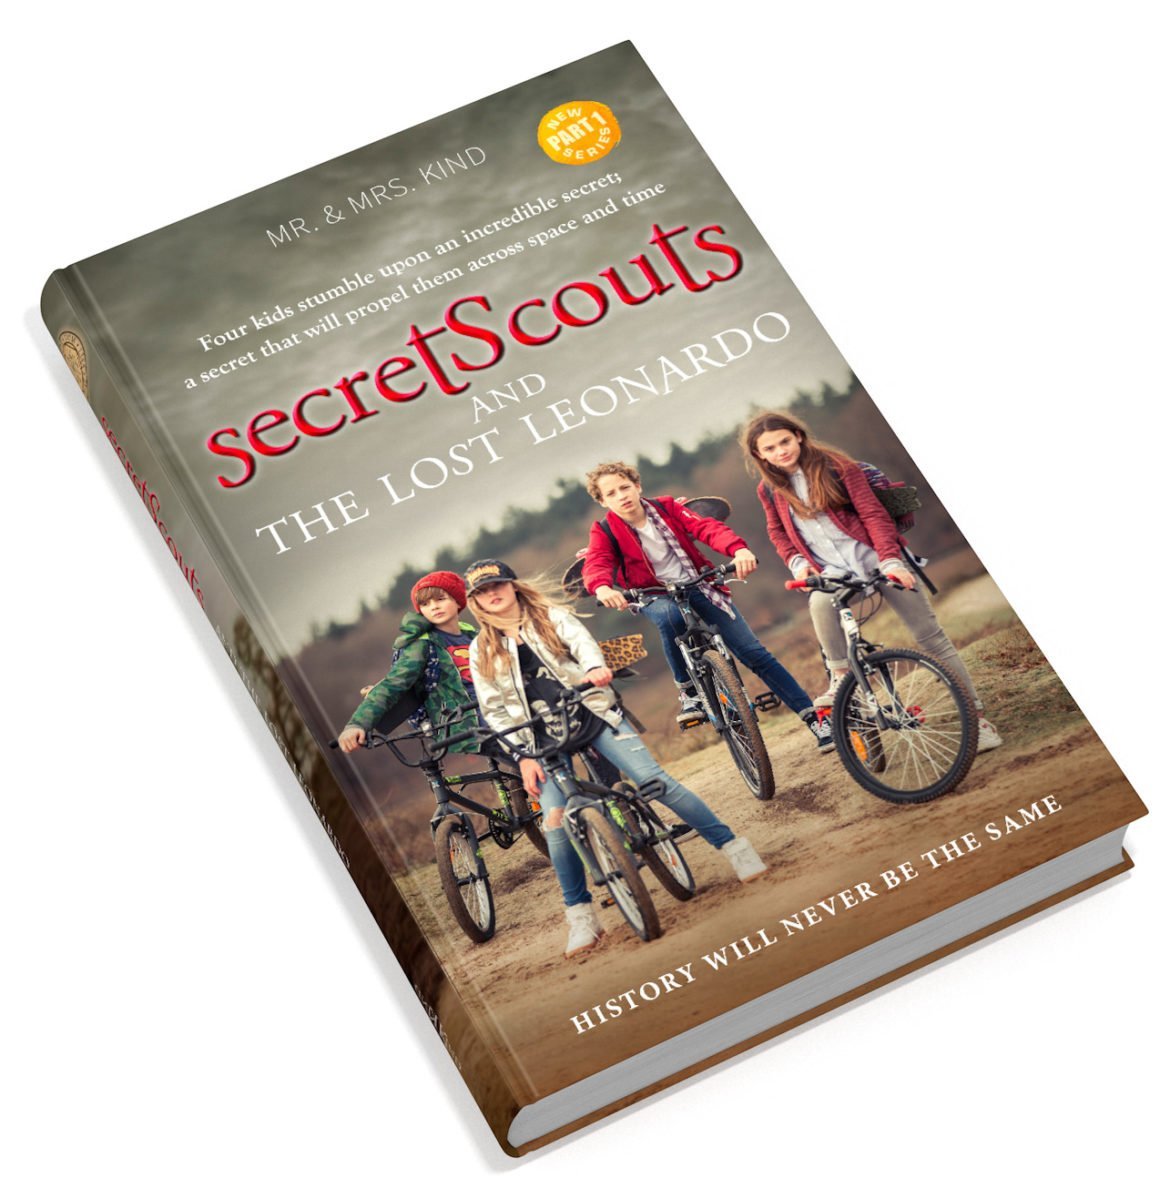 Secret Scouts and the Lost Leonardo by Dennis Kind and Wendel Kind - [a child's review] Mystery, and adventure, history, and intrigue. Find out more! #bookreview #childrensbooks #leonardodavinci #leonardo #books #greatreads #homeschooling #unschooling